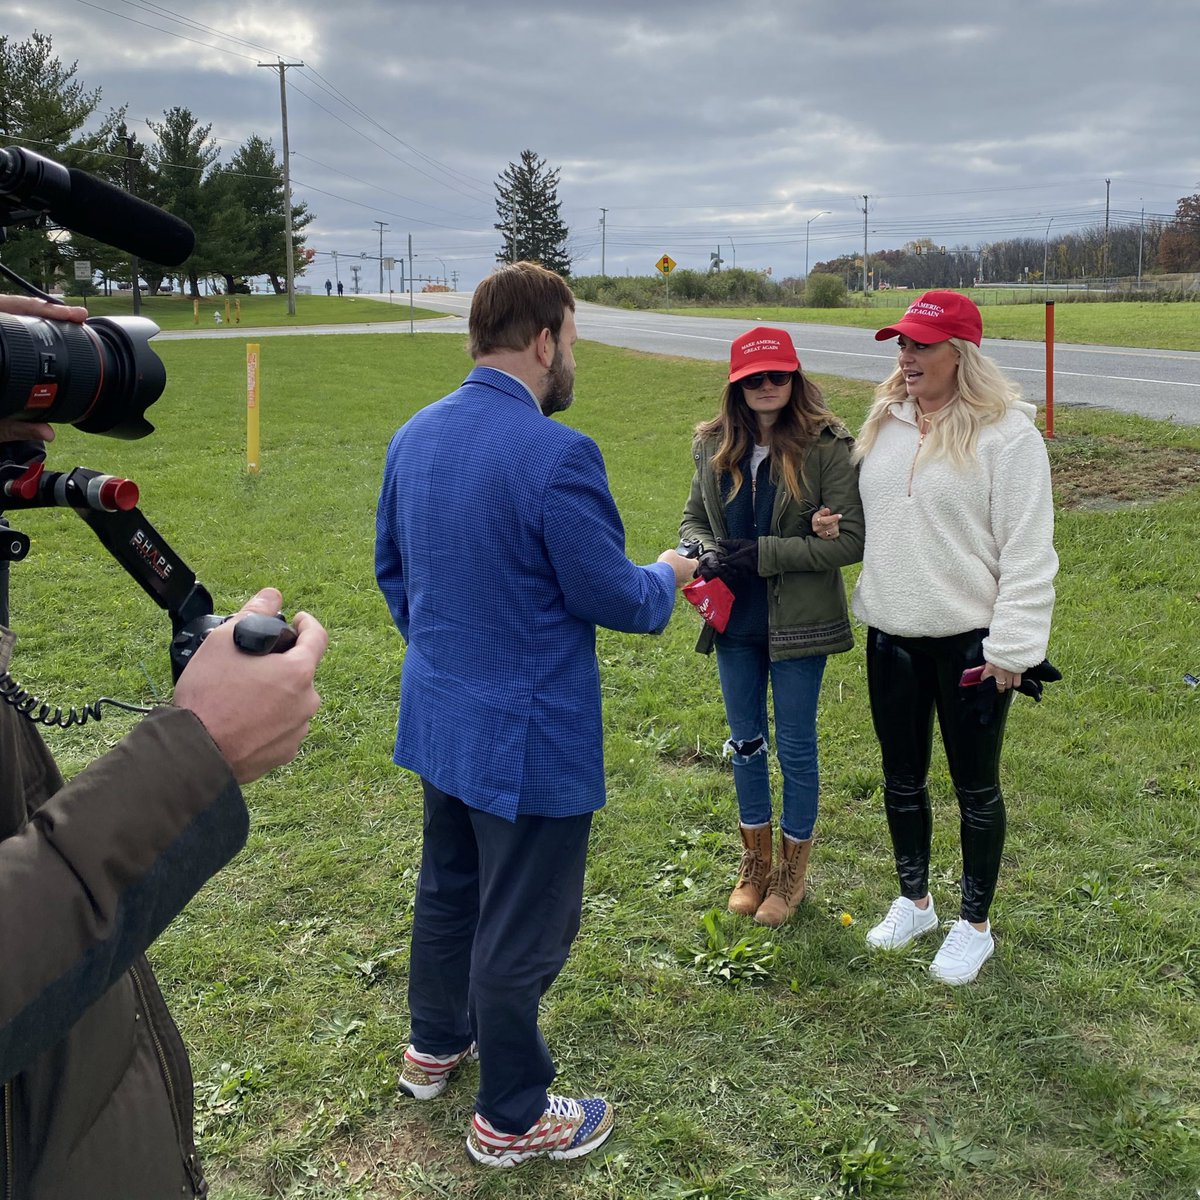 The rally-goers in the first photo say Trump isn’t actually doing bad with women, there’s a silent majority supporting him.An 18-year-old voter in the second photo says she supports Trump and is excited to vote “for the pro-life candidate.”   #TrumpRally